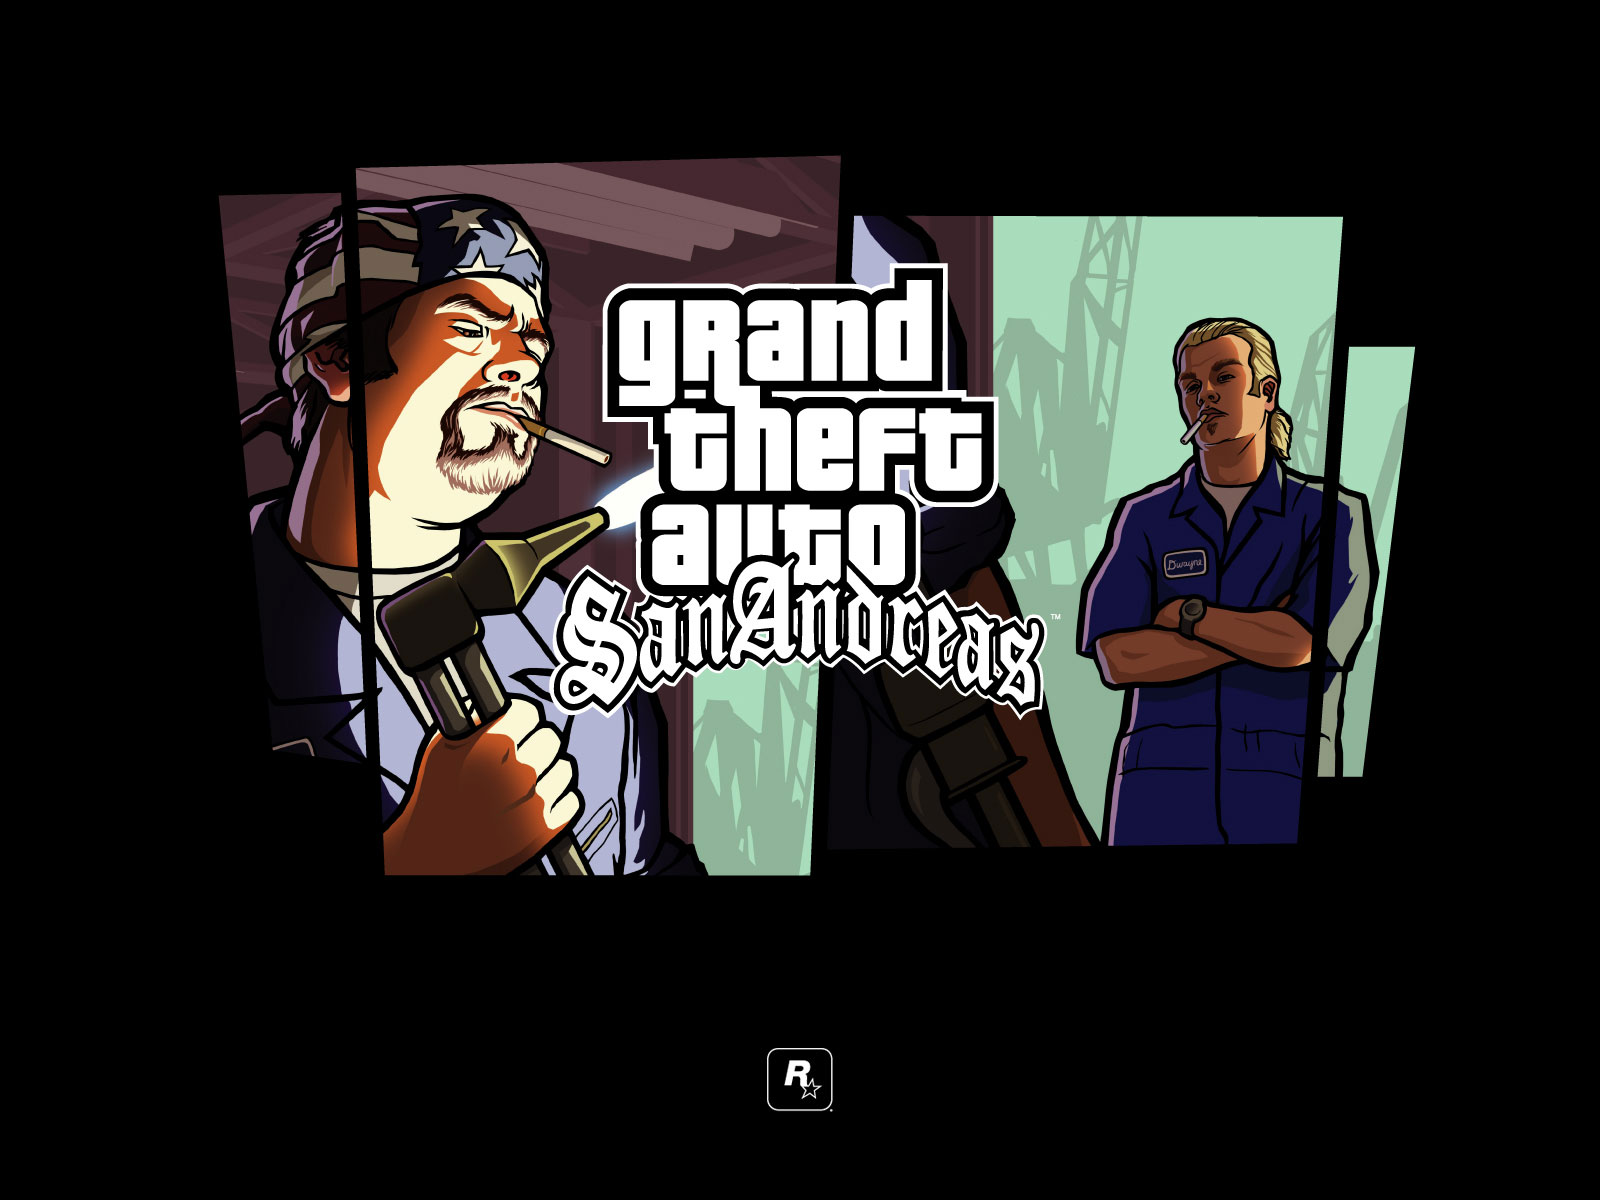 Grand theft auto san andreas v1.06 apk download for android windows 7